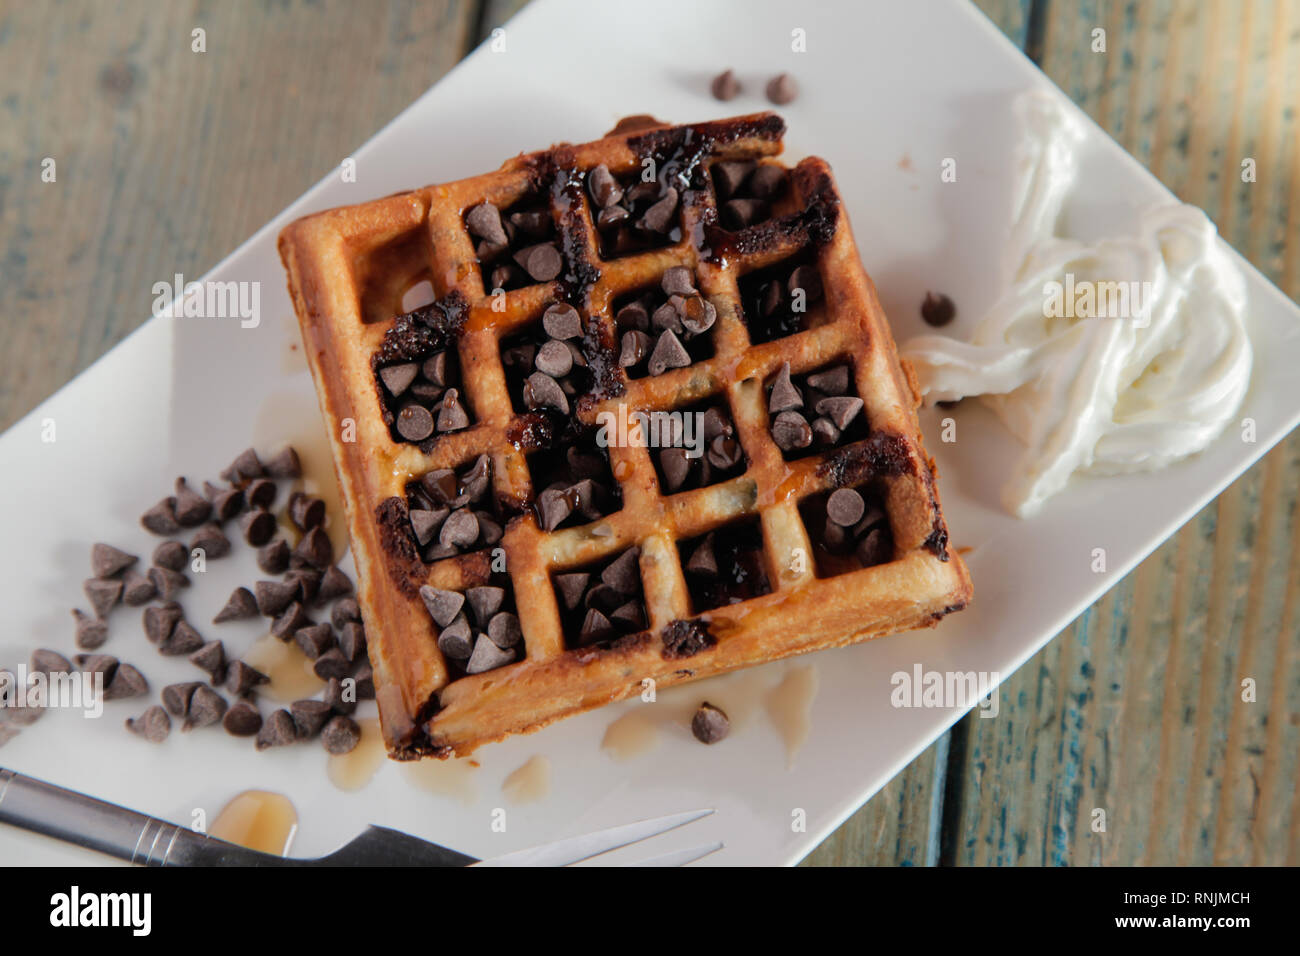 Chocolate Chip Waffle with whipped cream Stock Photo